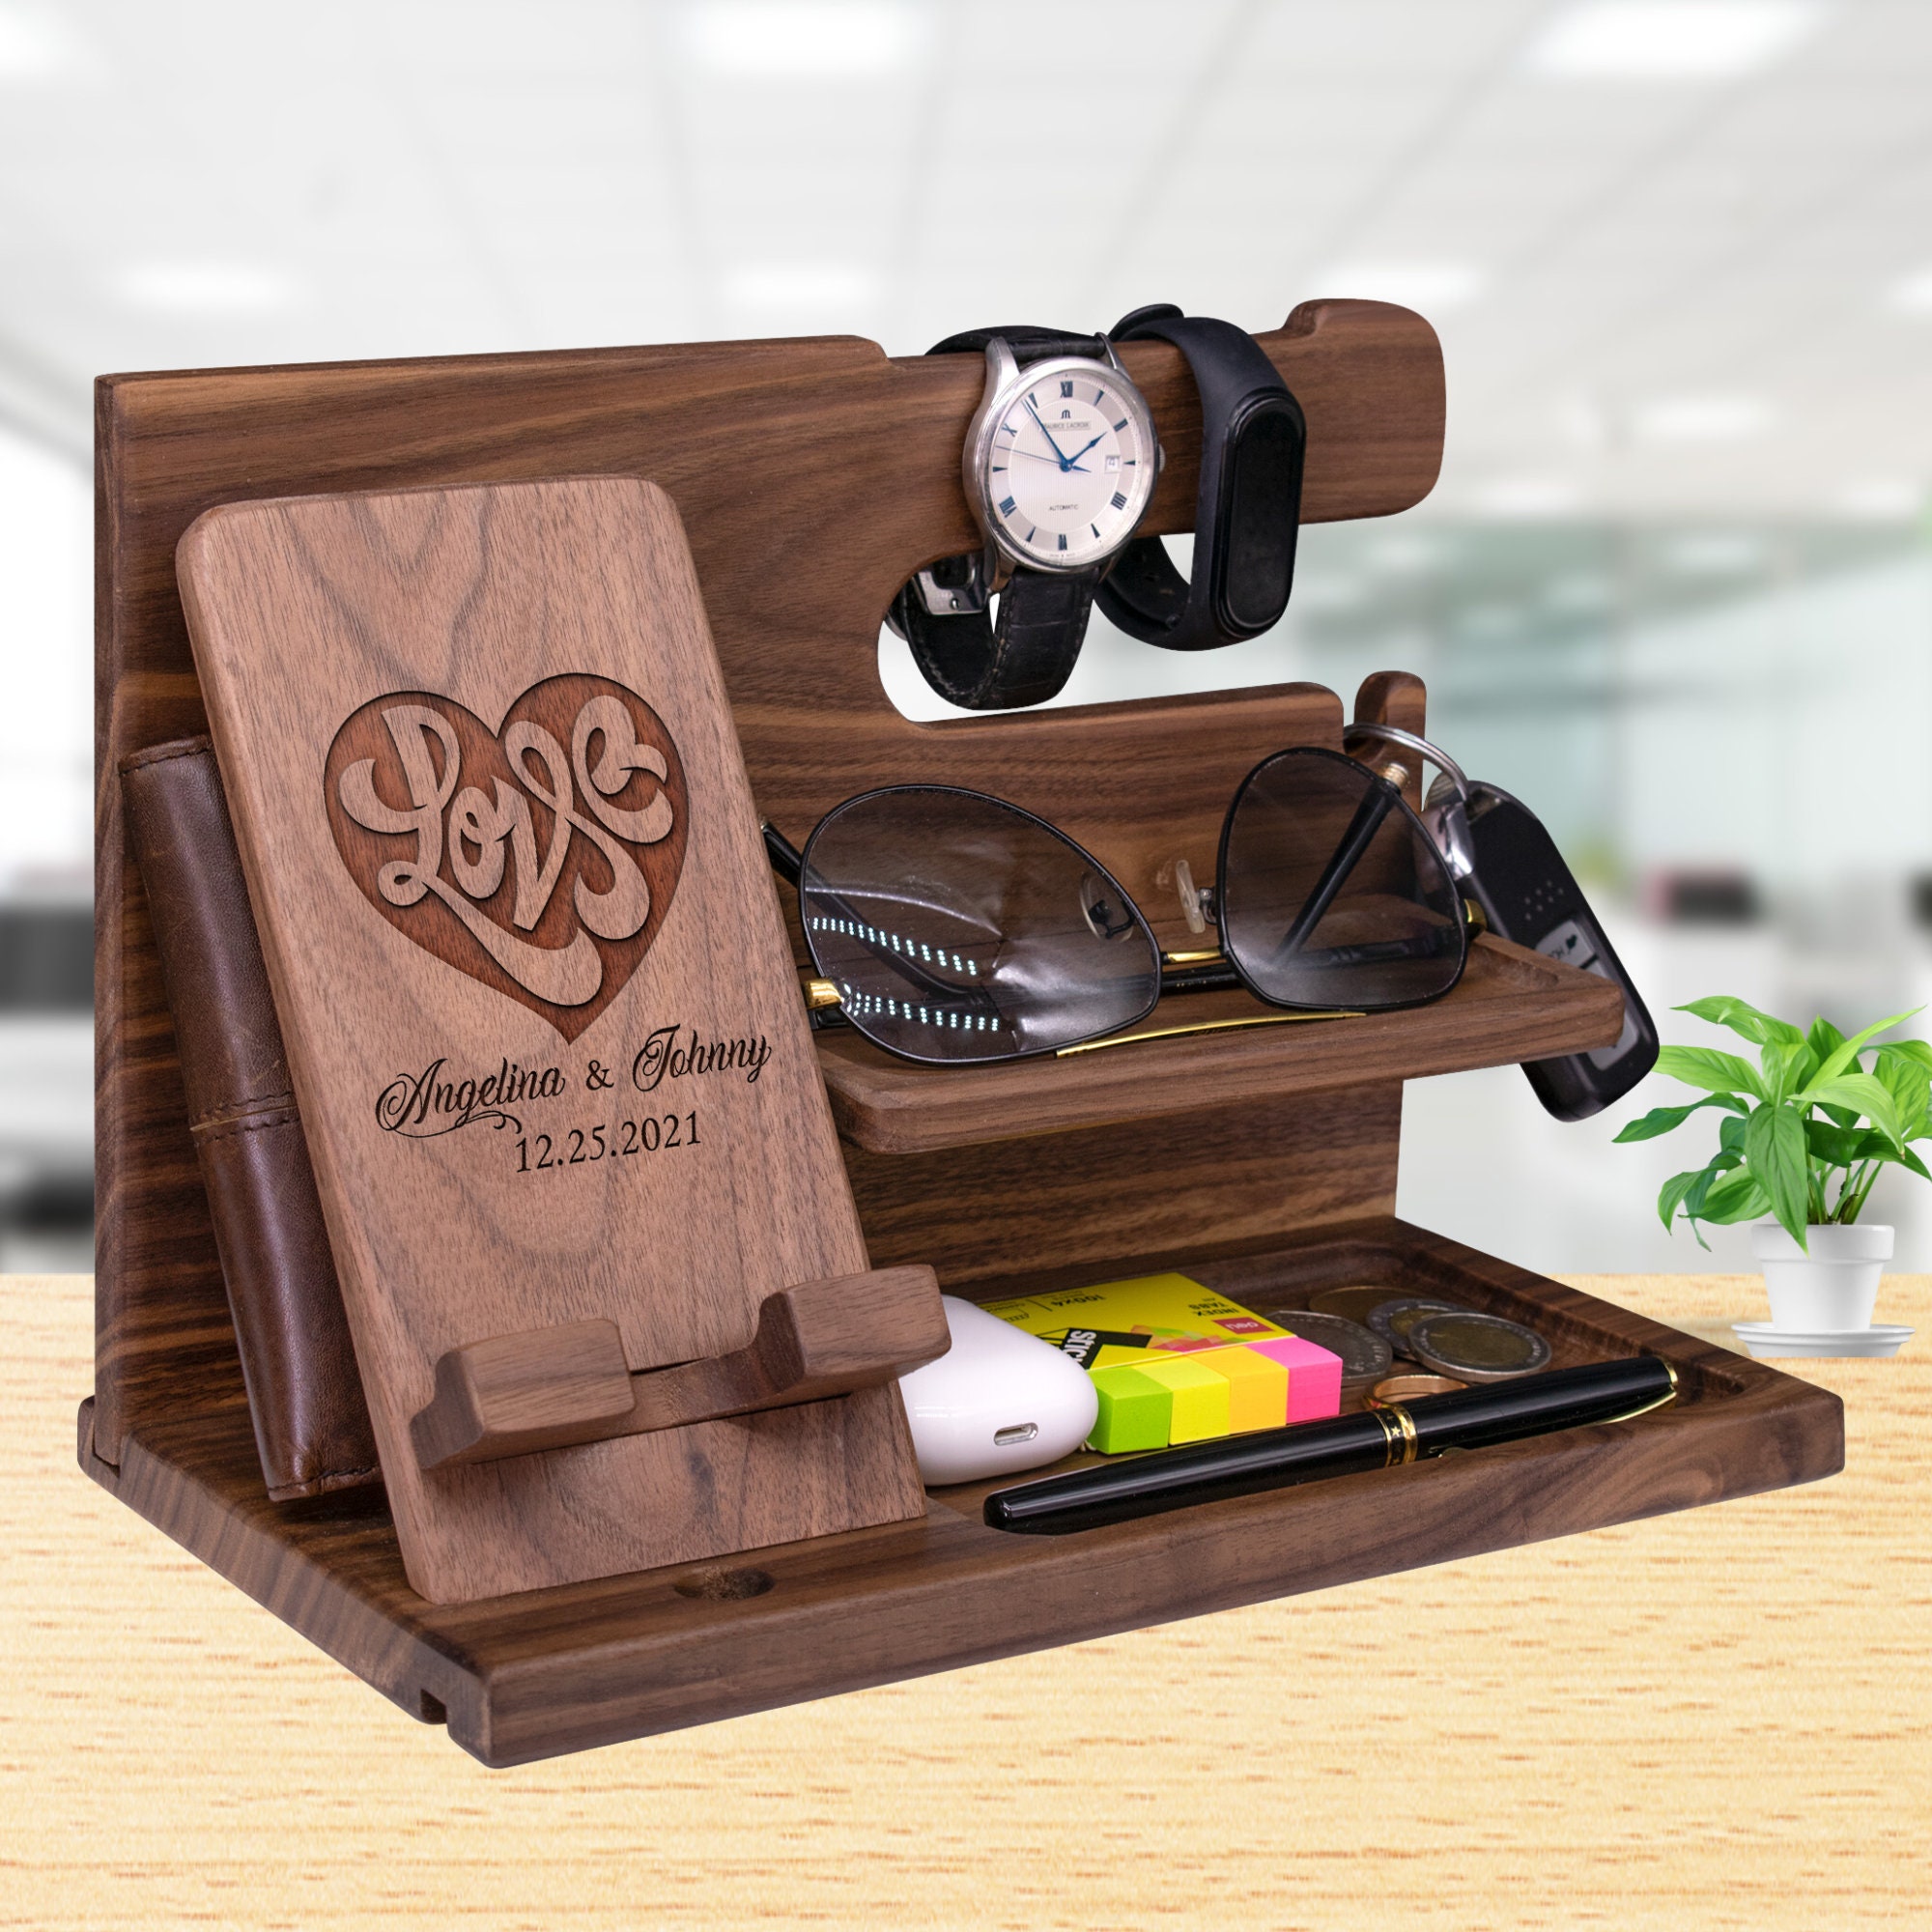 15 Stylish Office Desk Accessories For Him He'll Love